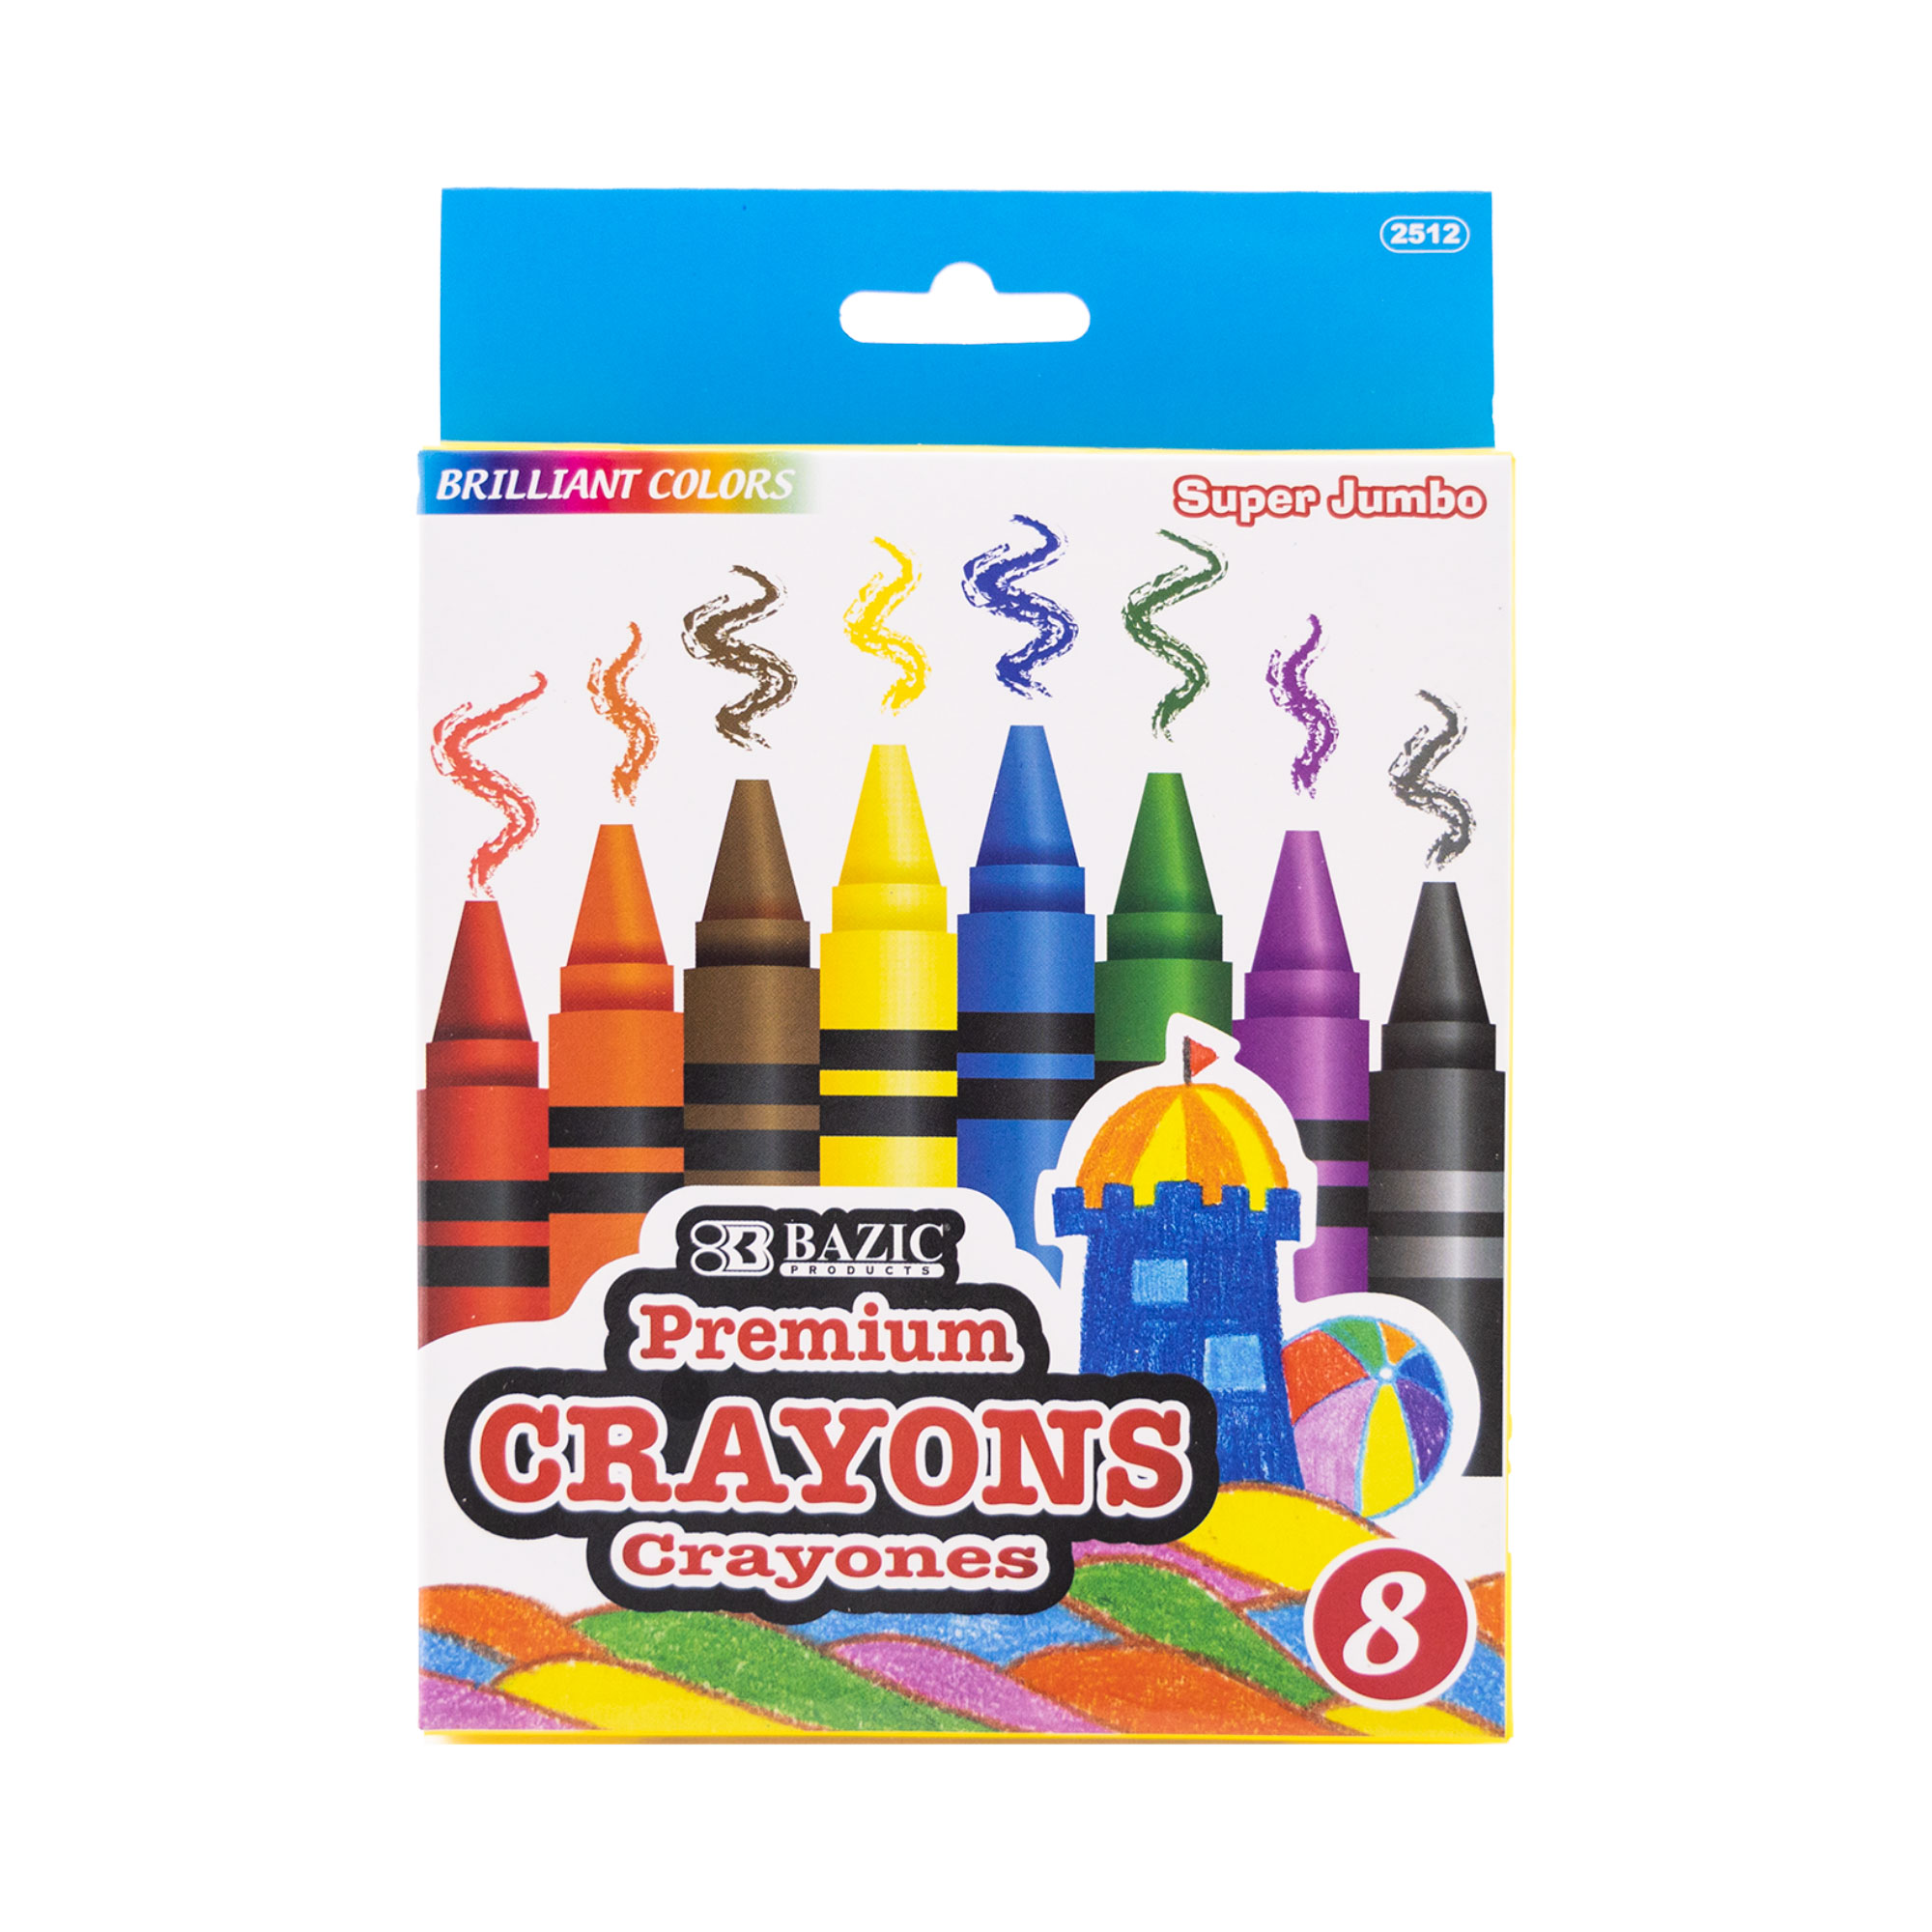 64 Children's Wax Crayons, Learning to Write